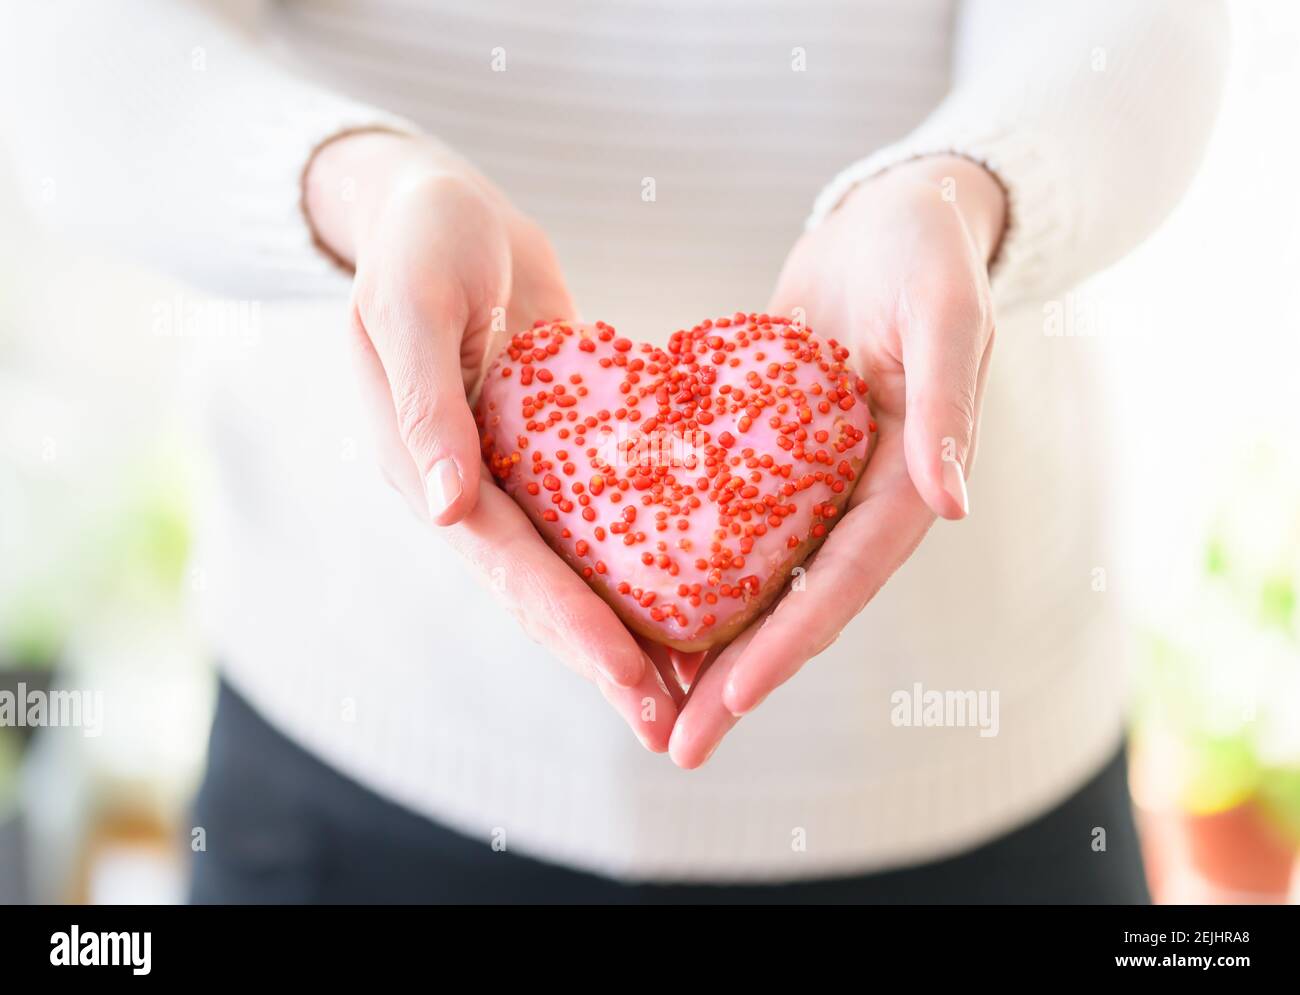 Heart in hand, Valentine's Day concept photo with a delicious heart donut Stock Photo